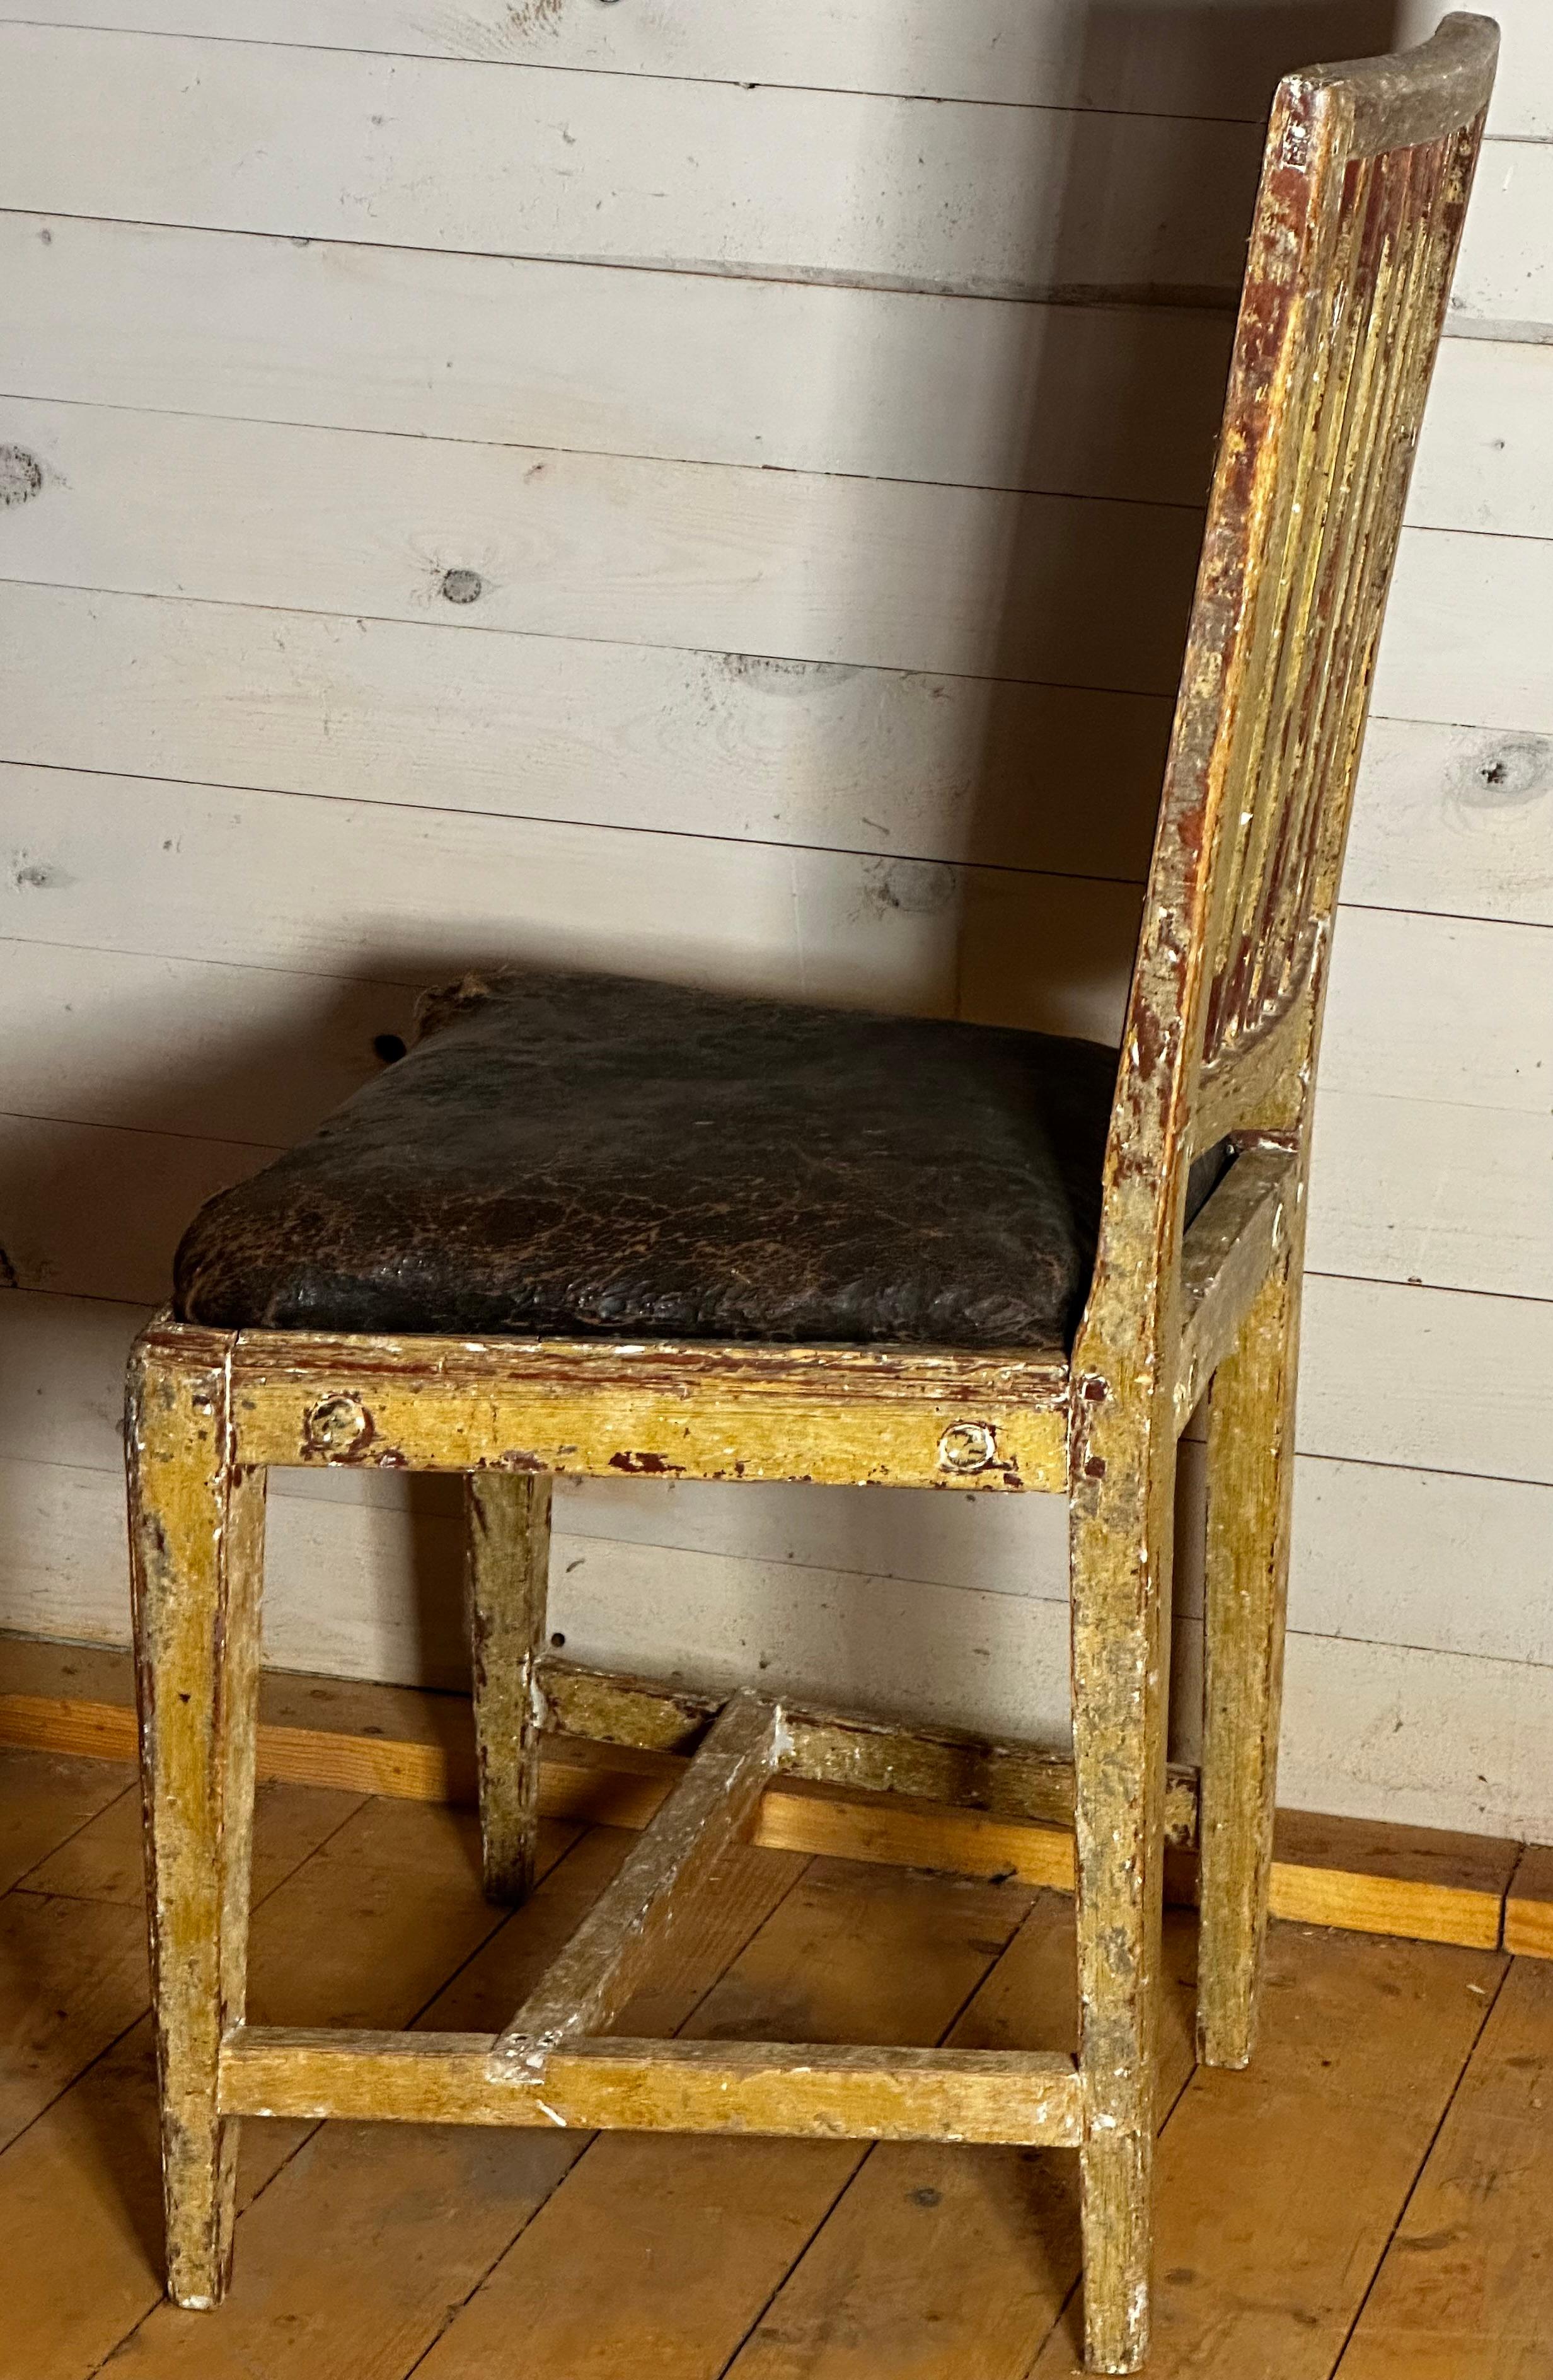 Chair made in Sweden about 1800. The original and first secondary color give the chairs surface indigenous textures. The seat is original as well as the leather.